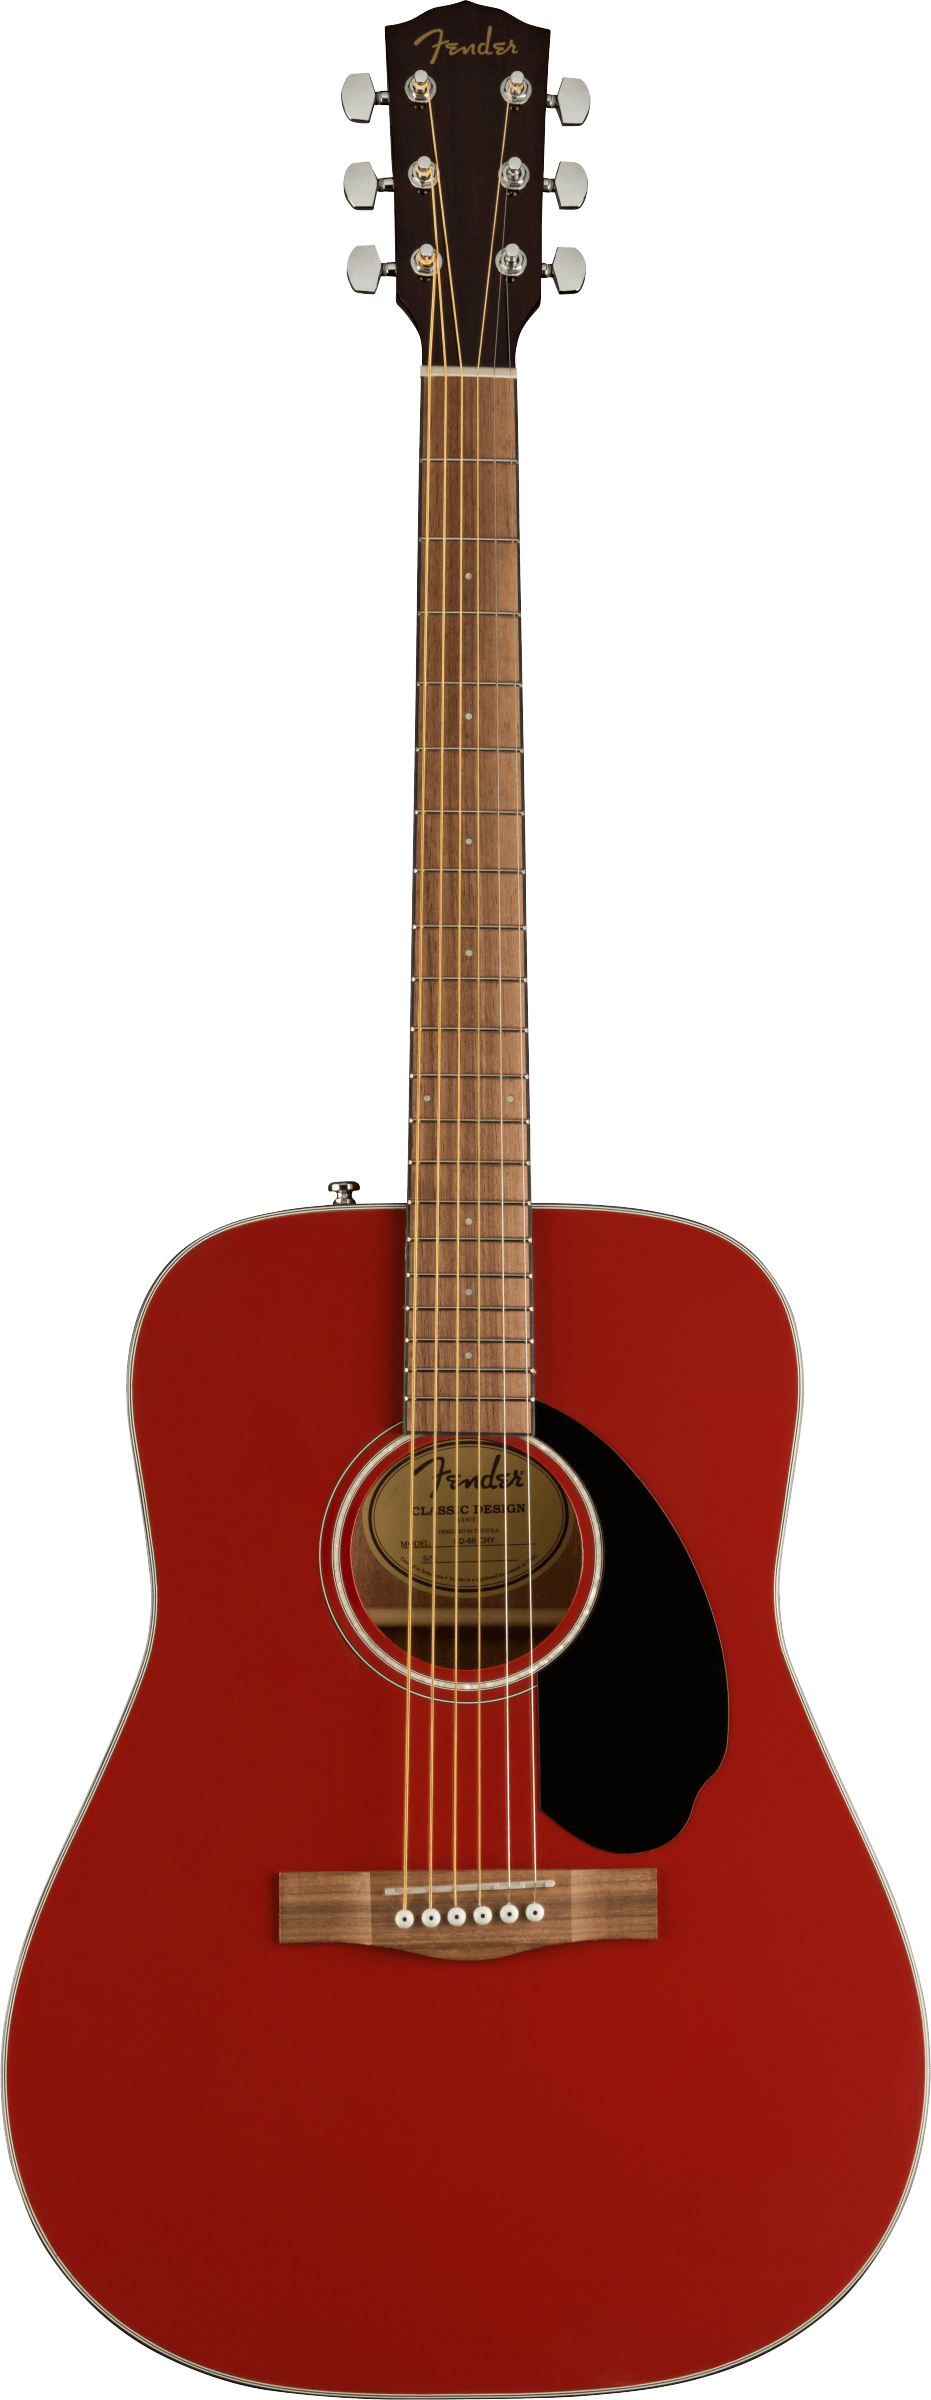 FENDER CD60 LIMITED EDITION CHERRY